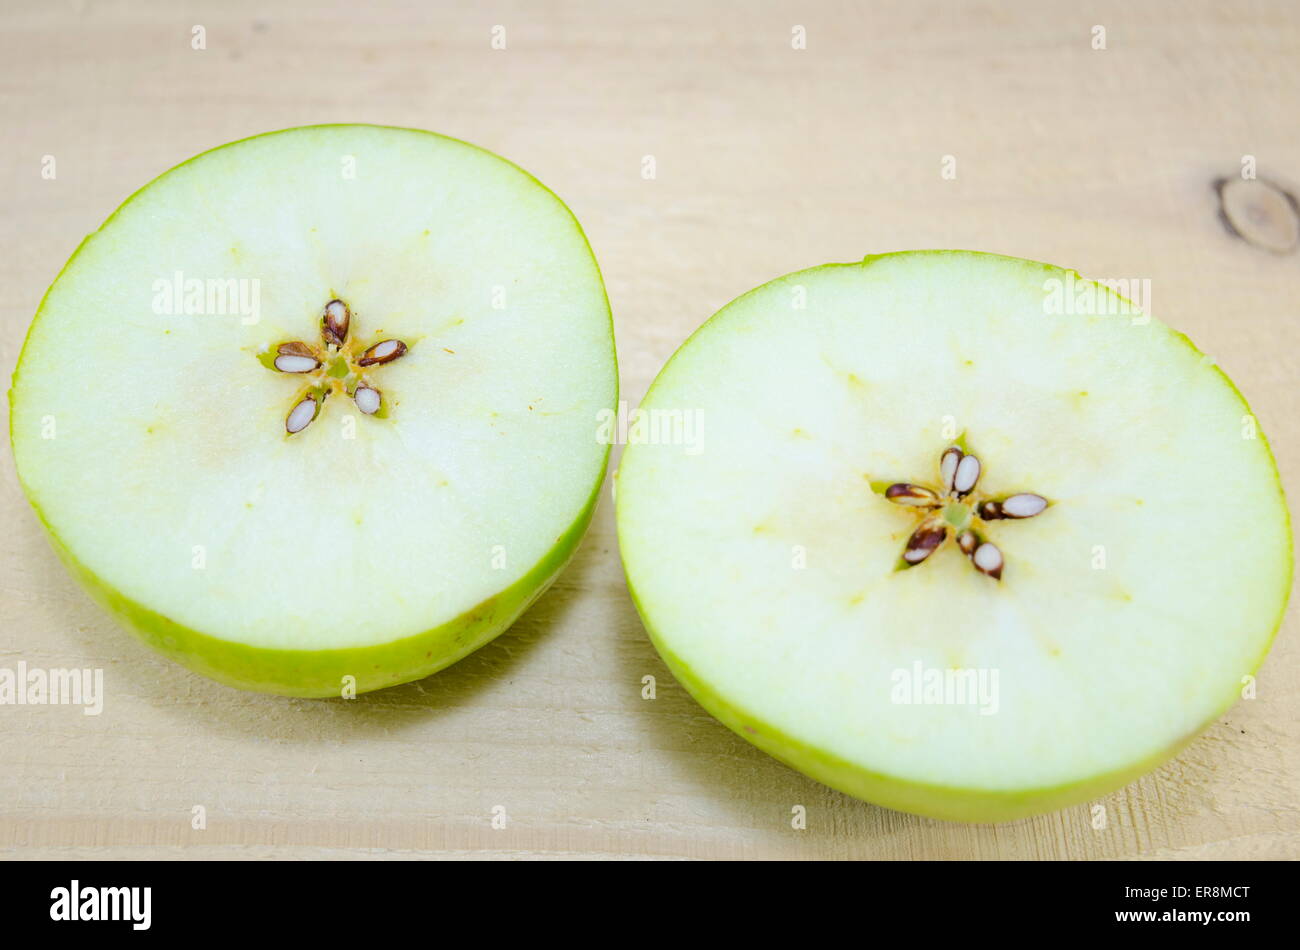 Apple sliced in thin pieces on a wooden table Stock Photo